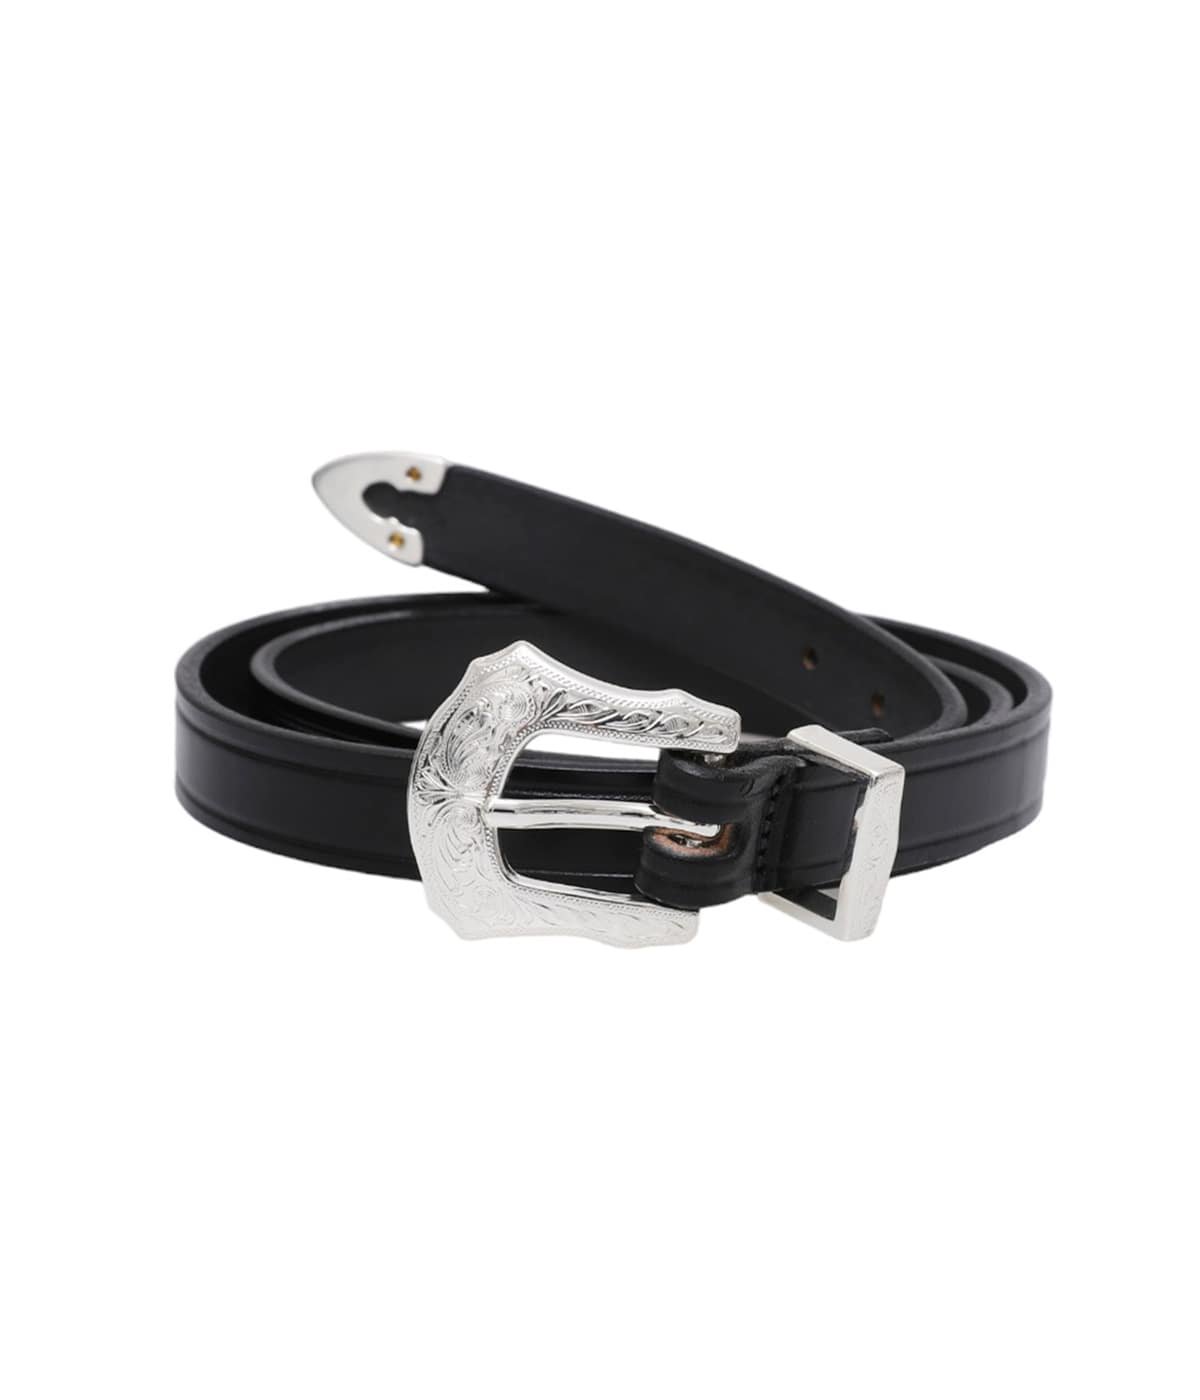 TORY LEATHER トリーレザー 3 inch 3-Piece Silver Buckle 国内正規品